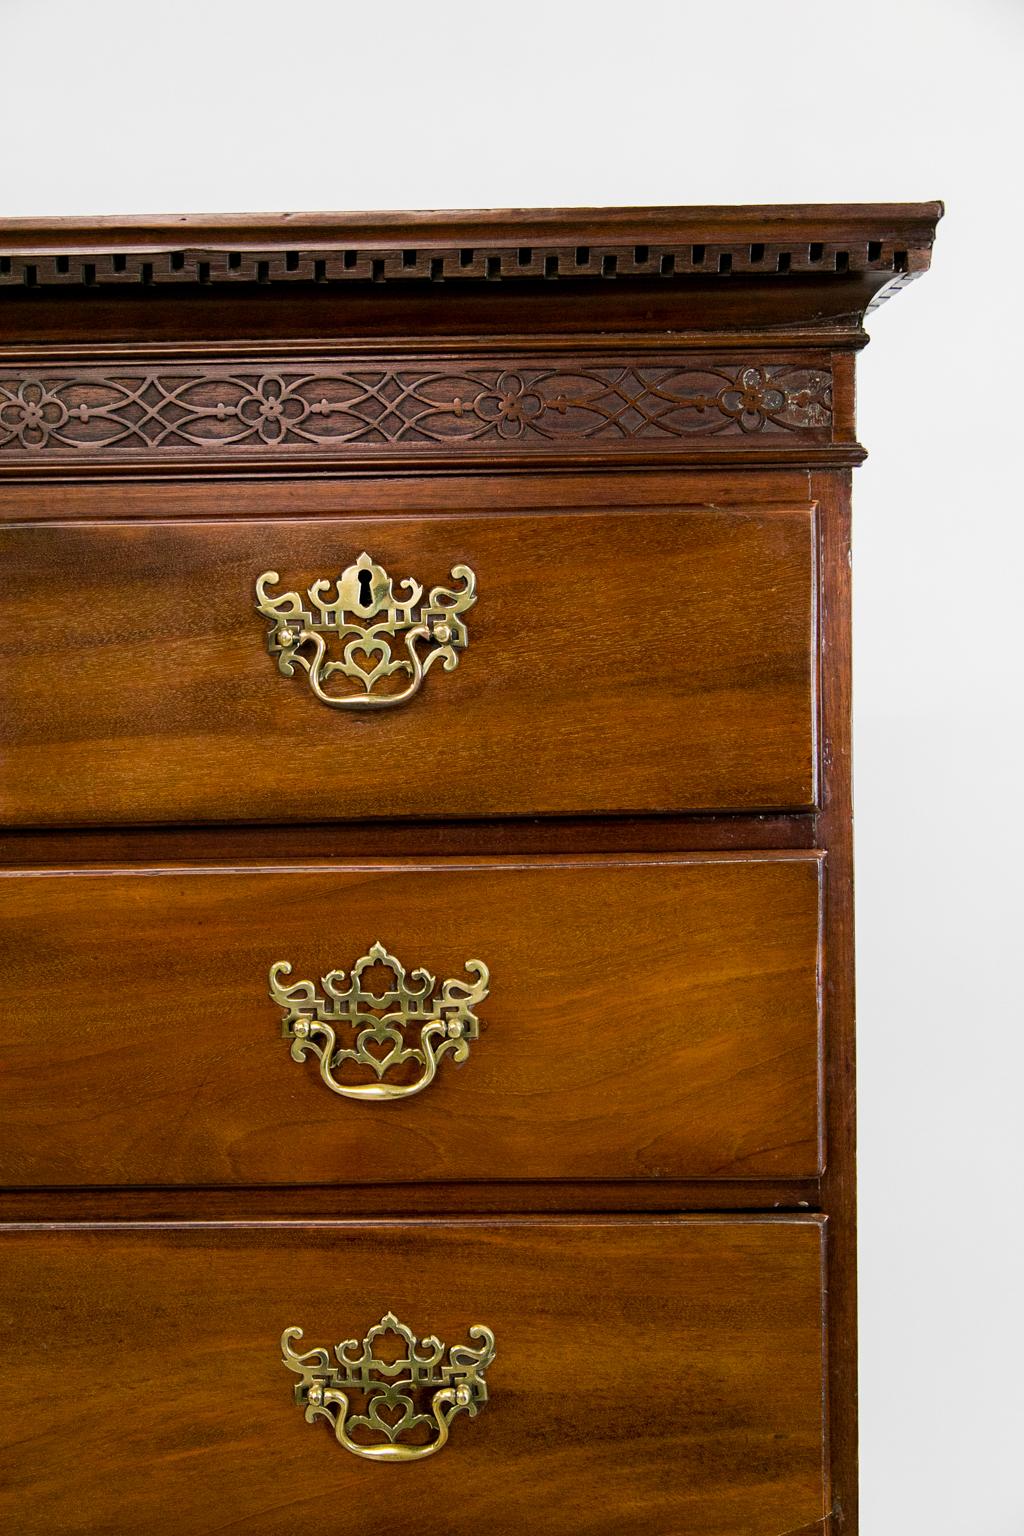 The top section of this Queen Anne highboy has a crown with Wall of Troy molding and a blind fretwork frieze carved in the manner of Thomas Elfe of 18th century Charleston, SC. The drawers have a lipped edge. The legs have a carved shell on the knee